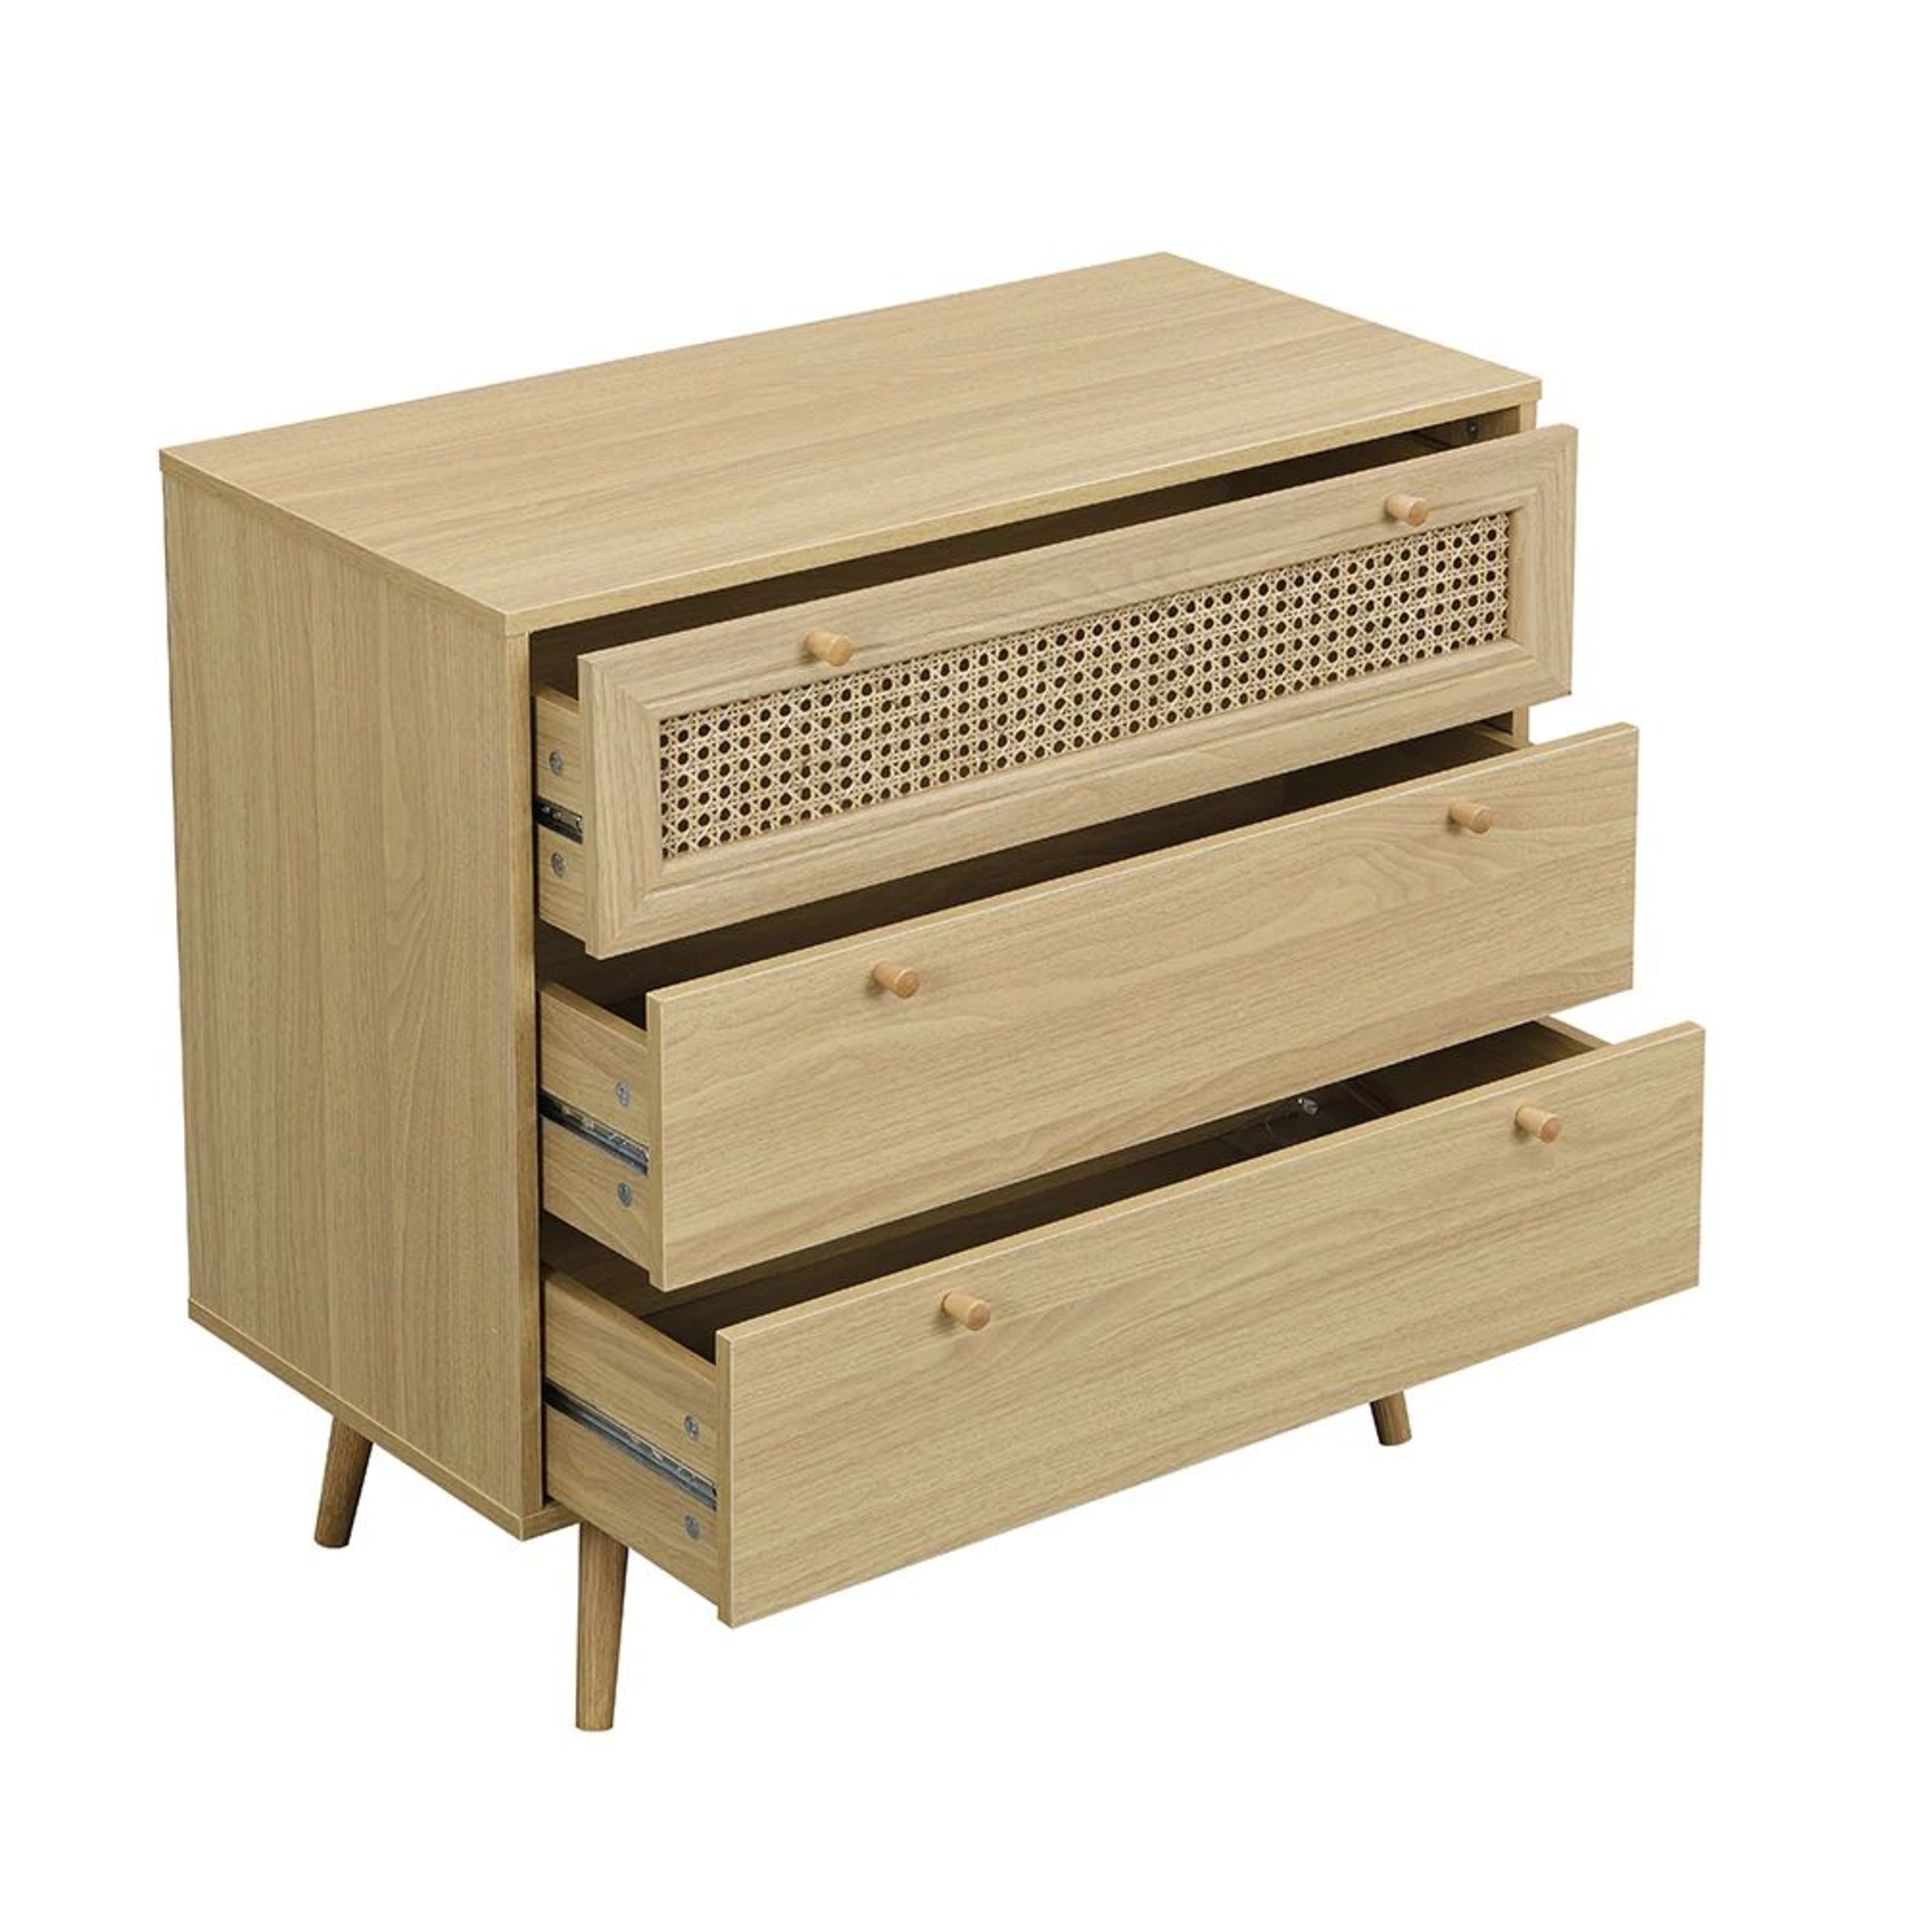 Anya Woven Rattan Chest of 3 Drawer in Natural Colour. - ER30. RRP £199.99. Our Anya drawer chest is - Bild 2 aus 2